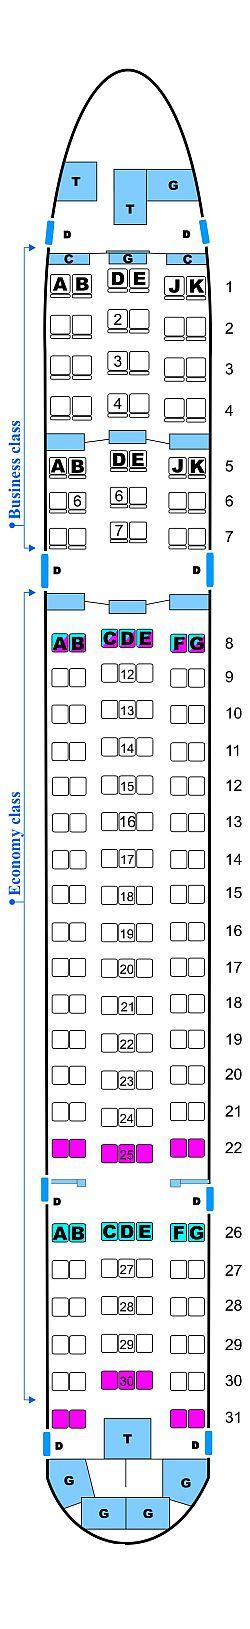 Seat map for Boeing B767 300ER